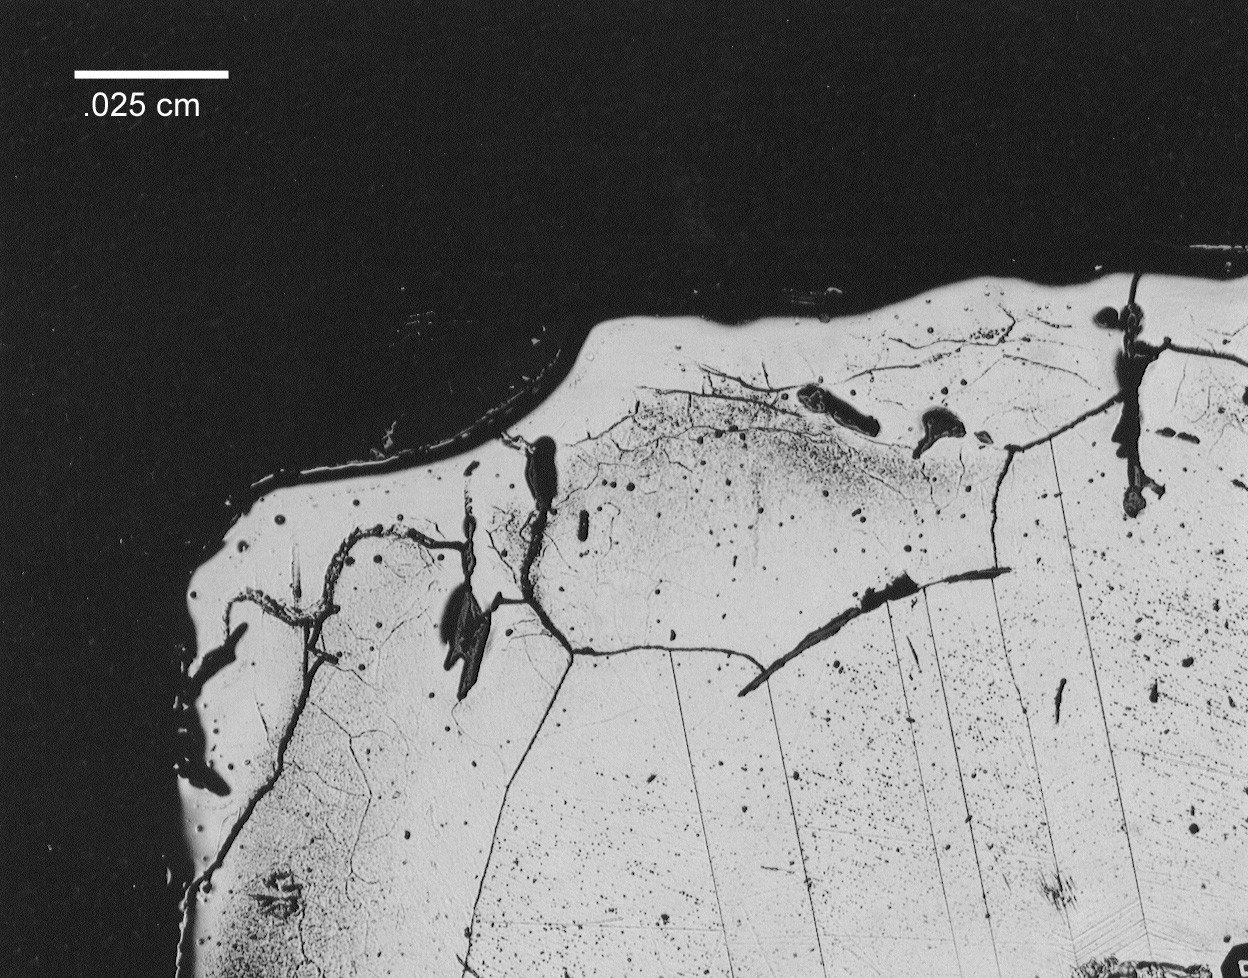 Figure 6a. Photomicrographs of specimen sectioned from melted end on 690 electrode sheath. Light area around outer edge shows melted 690. Molybdenum was not found in this region.